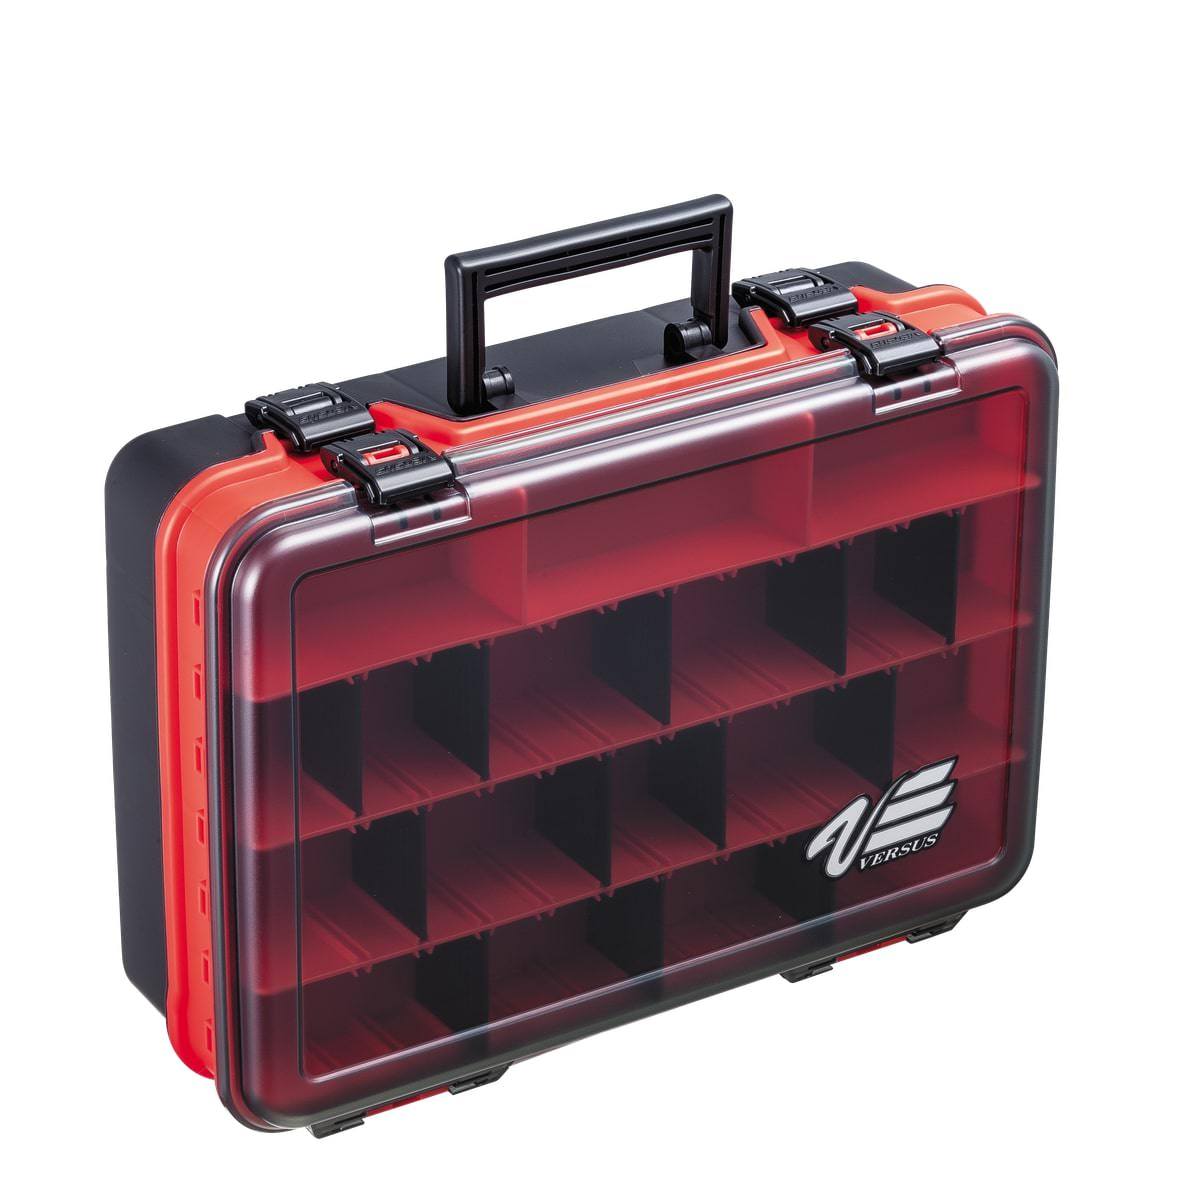 Versus VS-3070 Tackle Box-Tackle Boxes & Bags-Versus-Red-Fishing Station